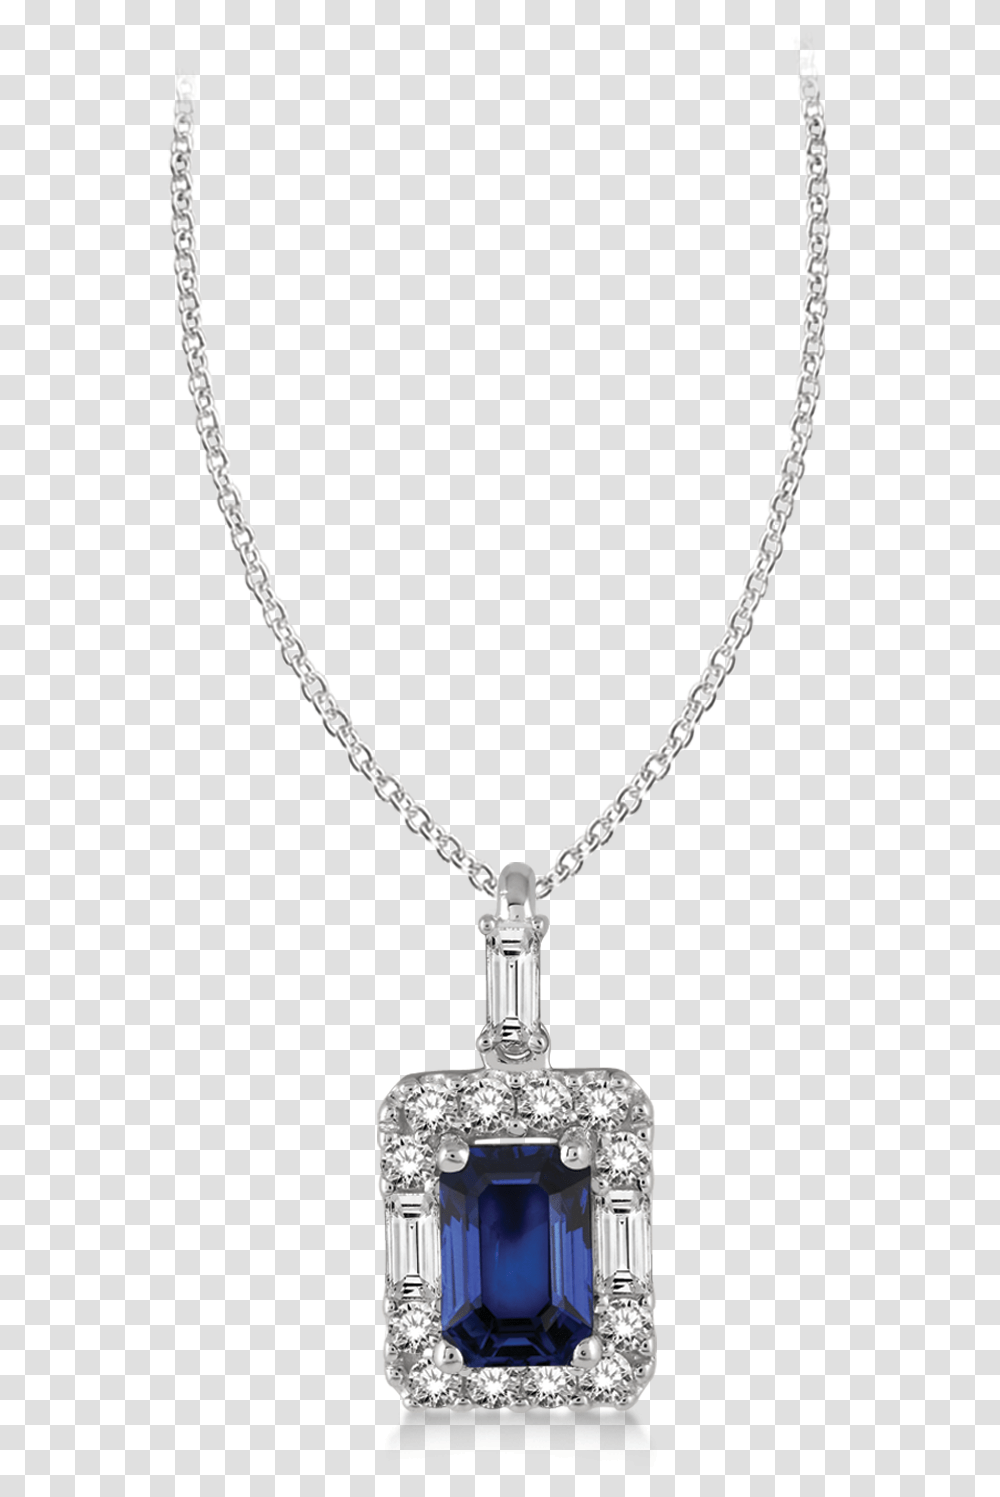 Sapphire Necklace Background, Jewelry, Accessories, Accessory, Pendant Transparent Png